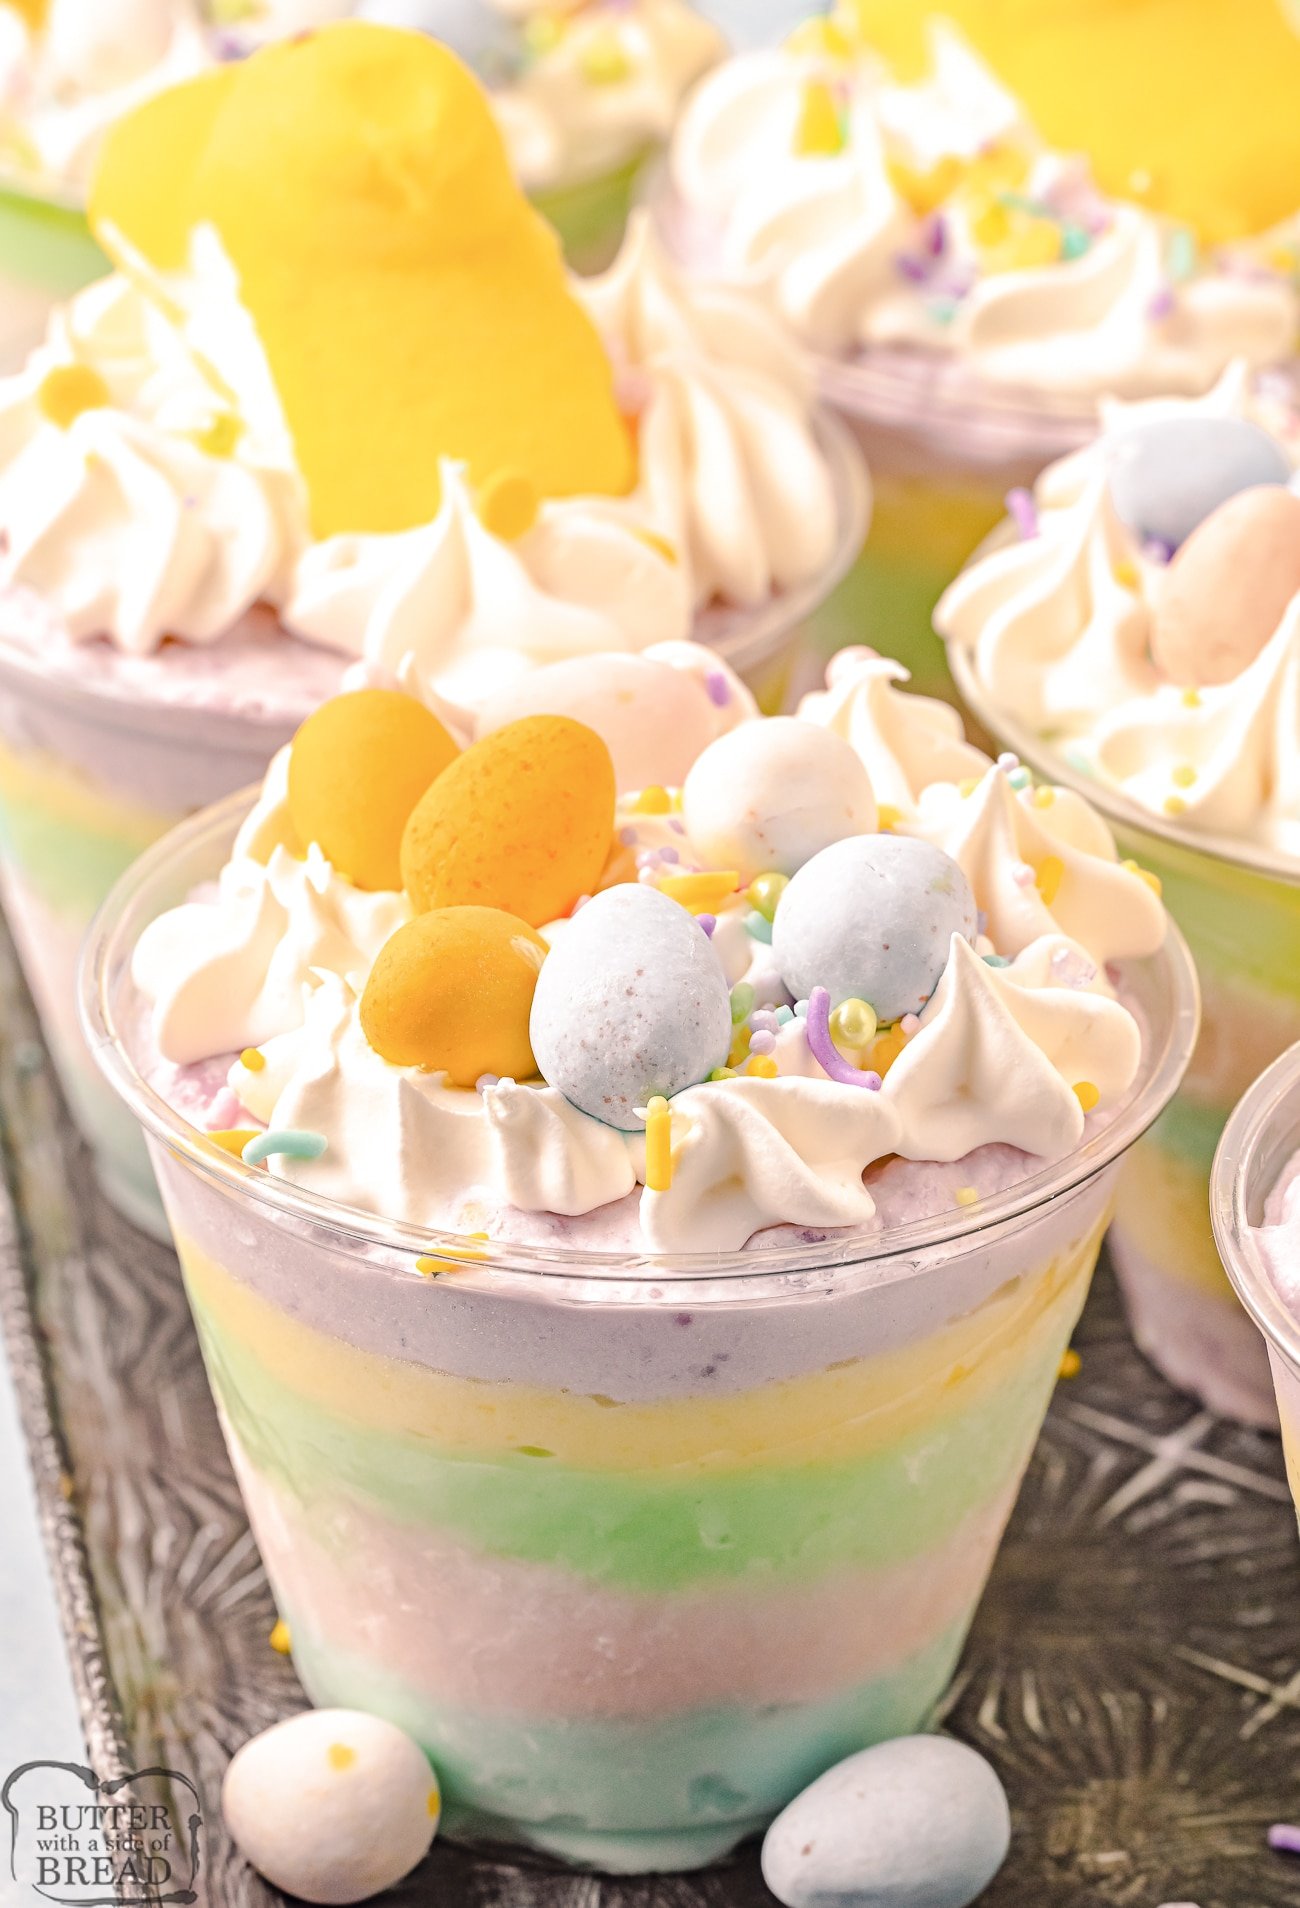 Layered Jello parfaits for Easter